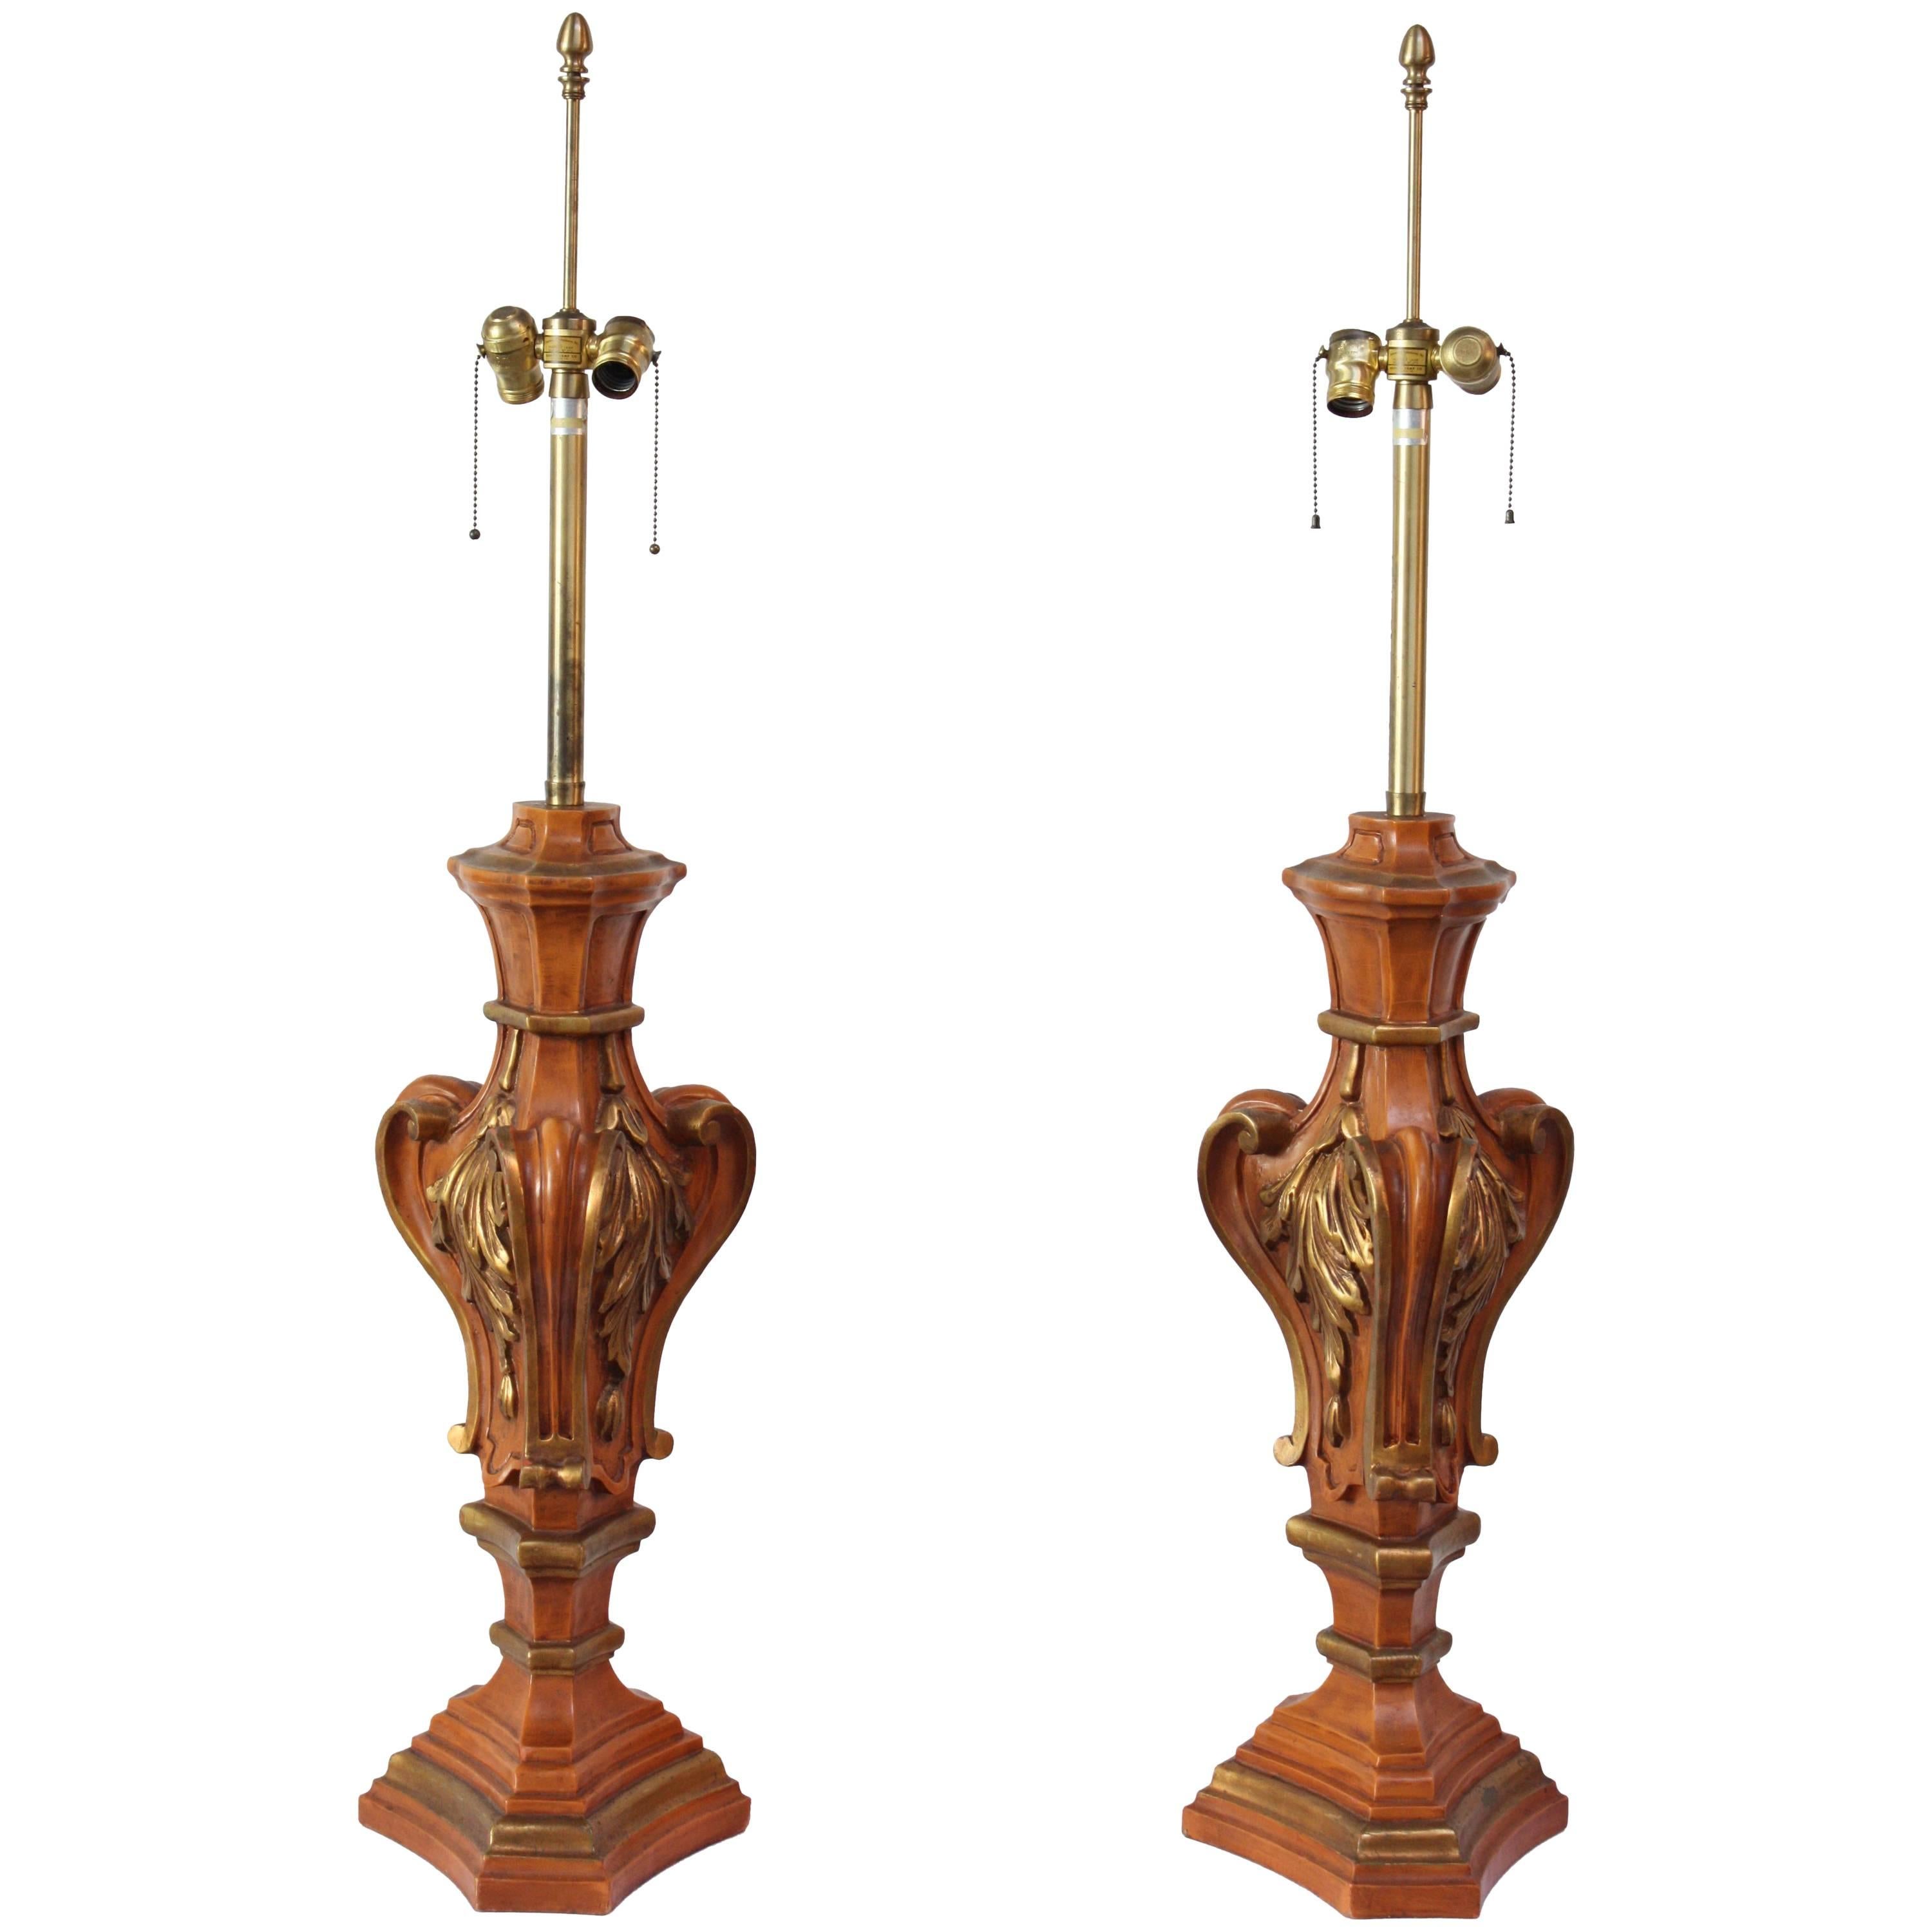 Pair of Oversized Hollywood Regency Carved and Gilded Table Lamps by Marbro